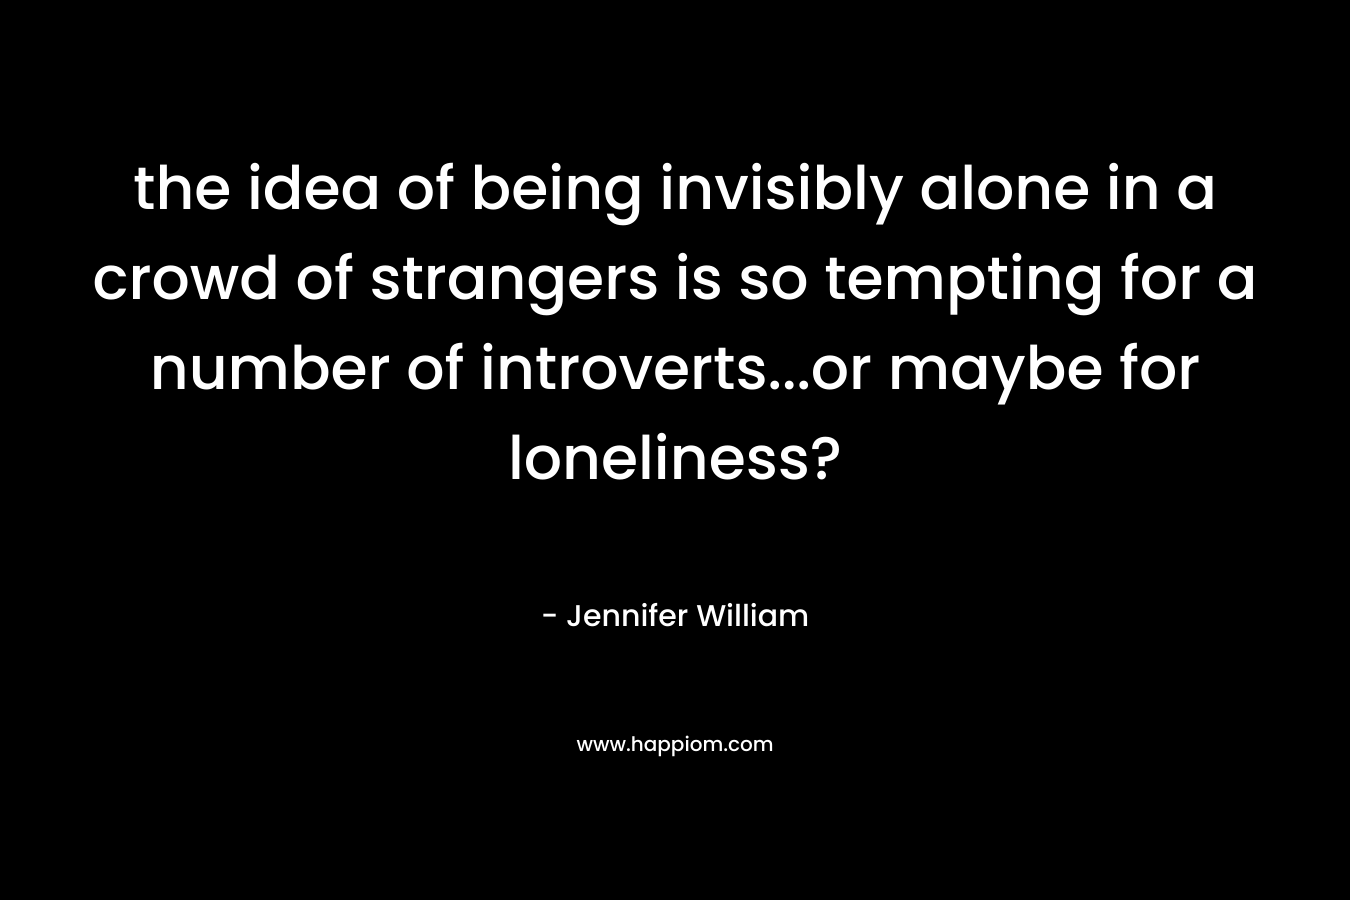 the idea of being invisibly alone in a crowd of strangers is so tempting for a number of introverts...or maybe for loneliness?